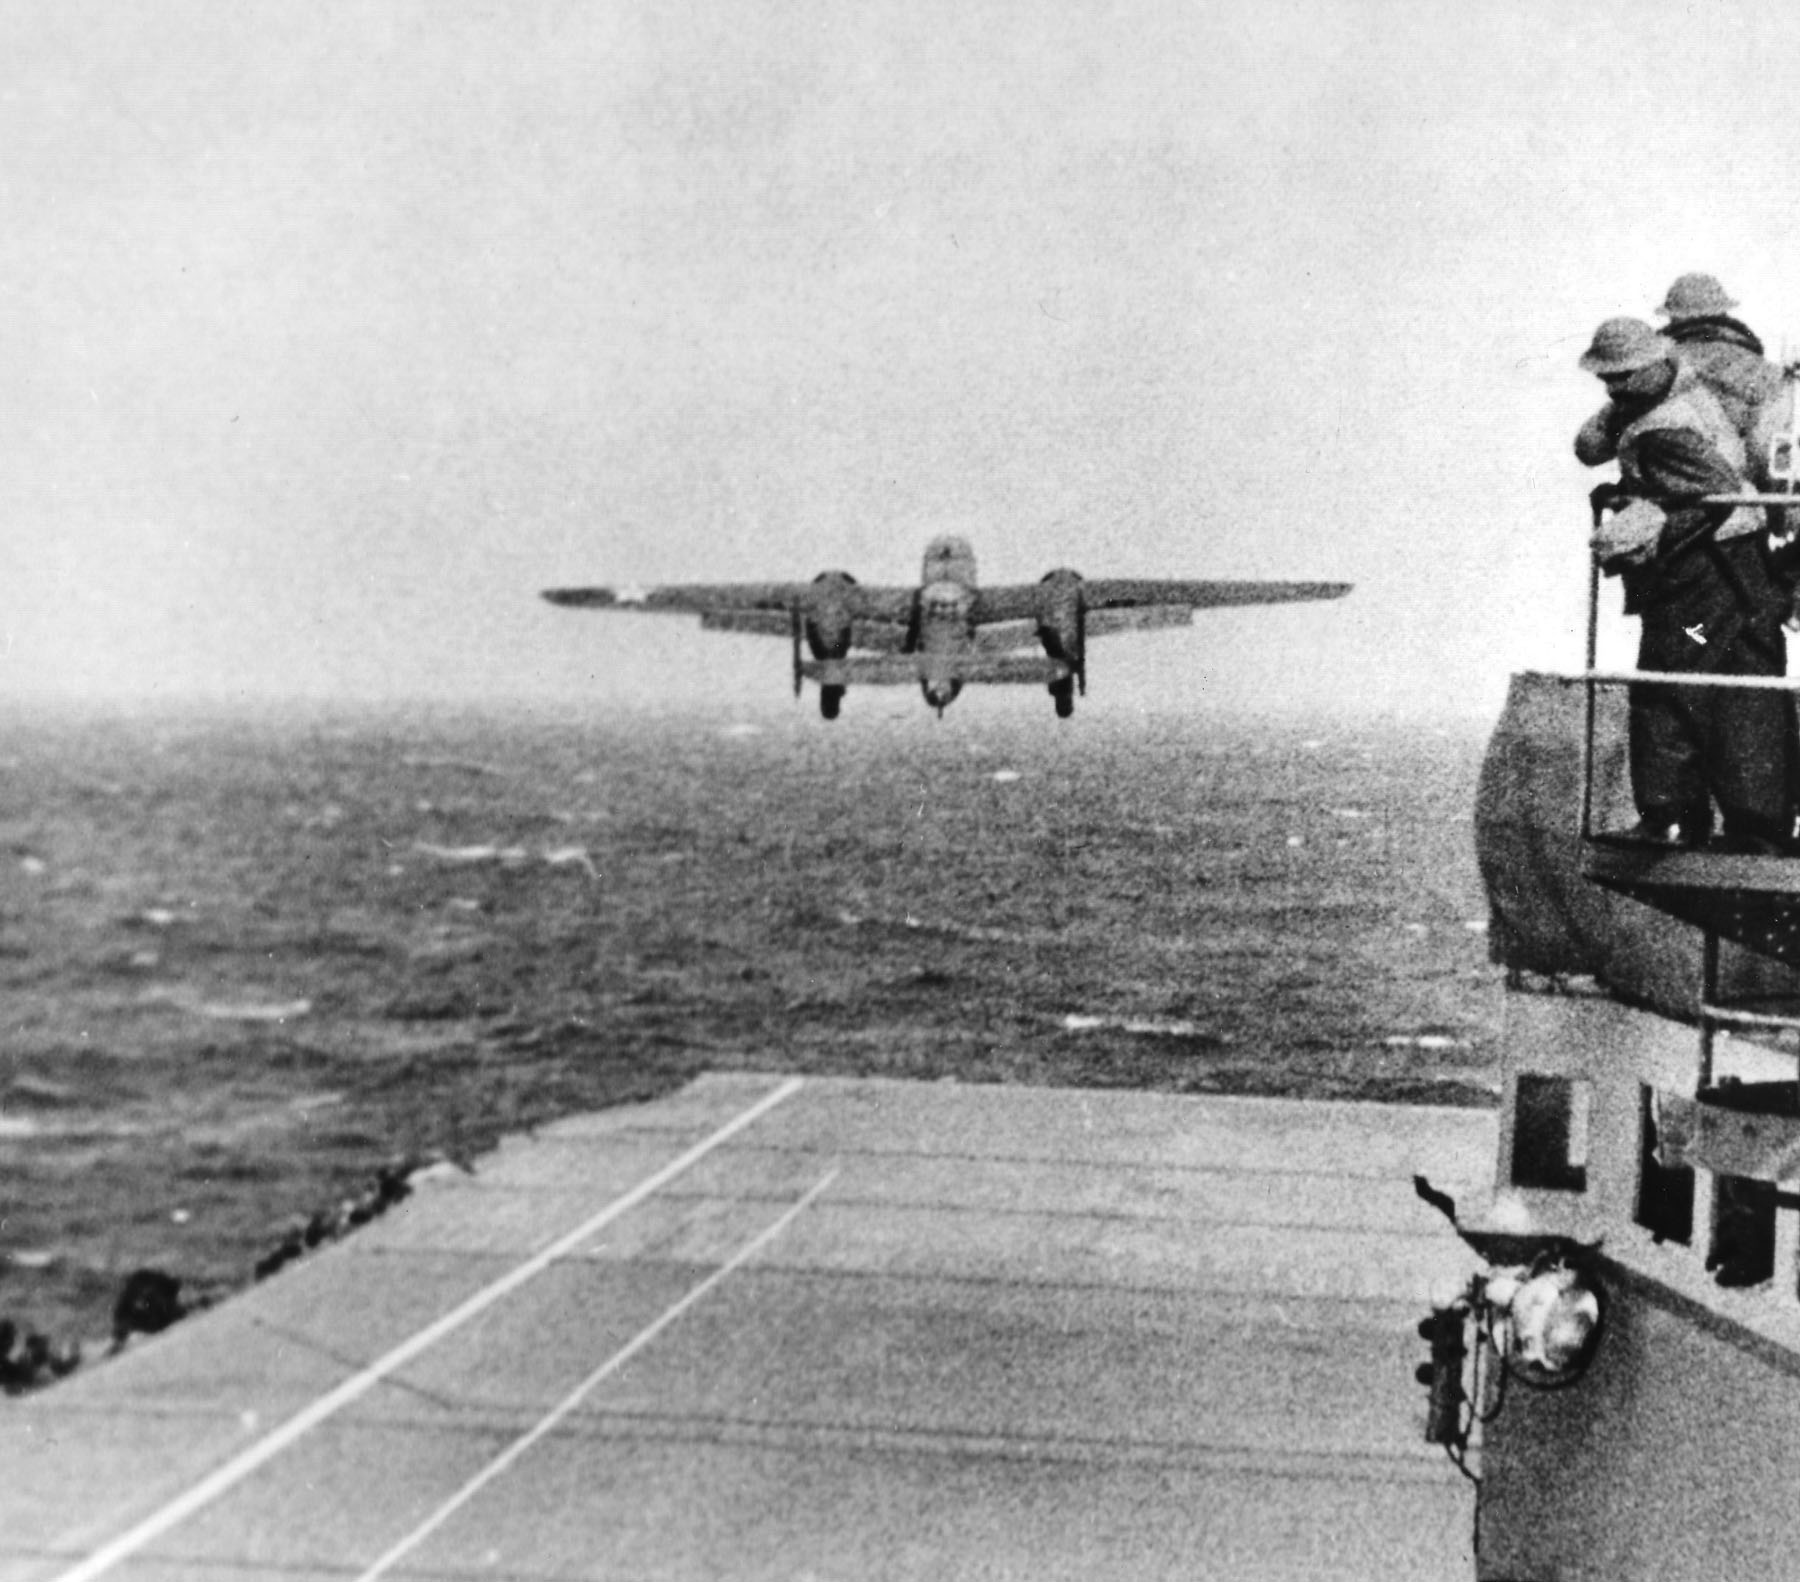 A B-25 bomber launching from the USS Hornet on April 18, 1942, to start the famed Doolittle Raiders mission of World War II. (US Navy photo)